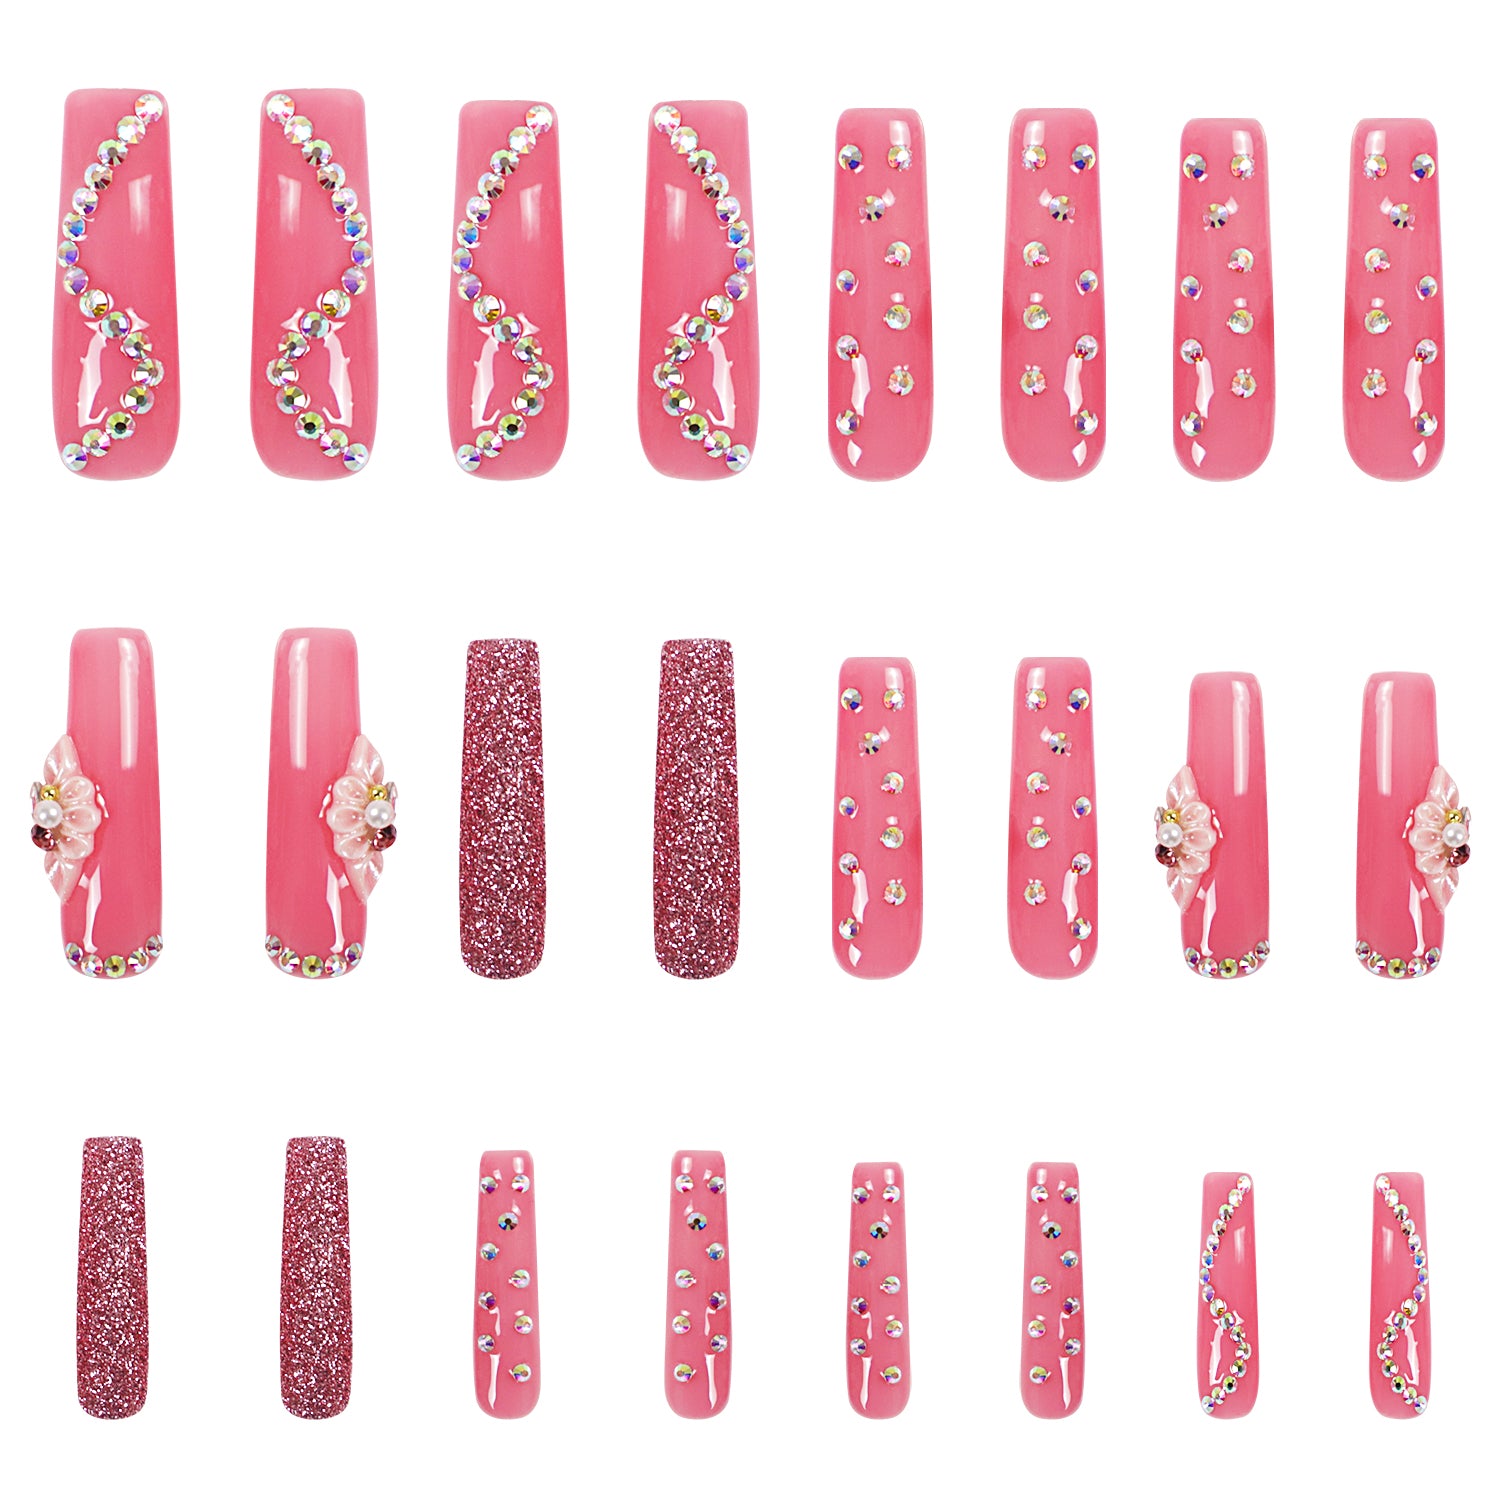 24 hot pink press-on acrylic nails with rhinestones, sparkling accents, glitter patterns, and flower blossoms from the Shimmer Blossom collection by Lovful.